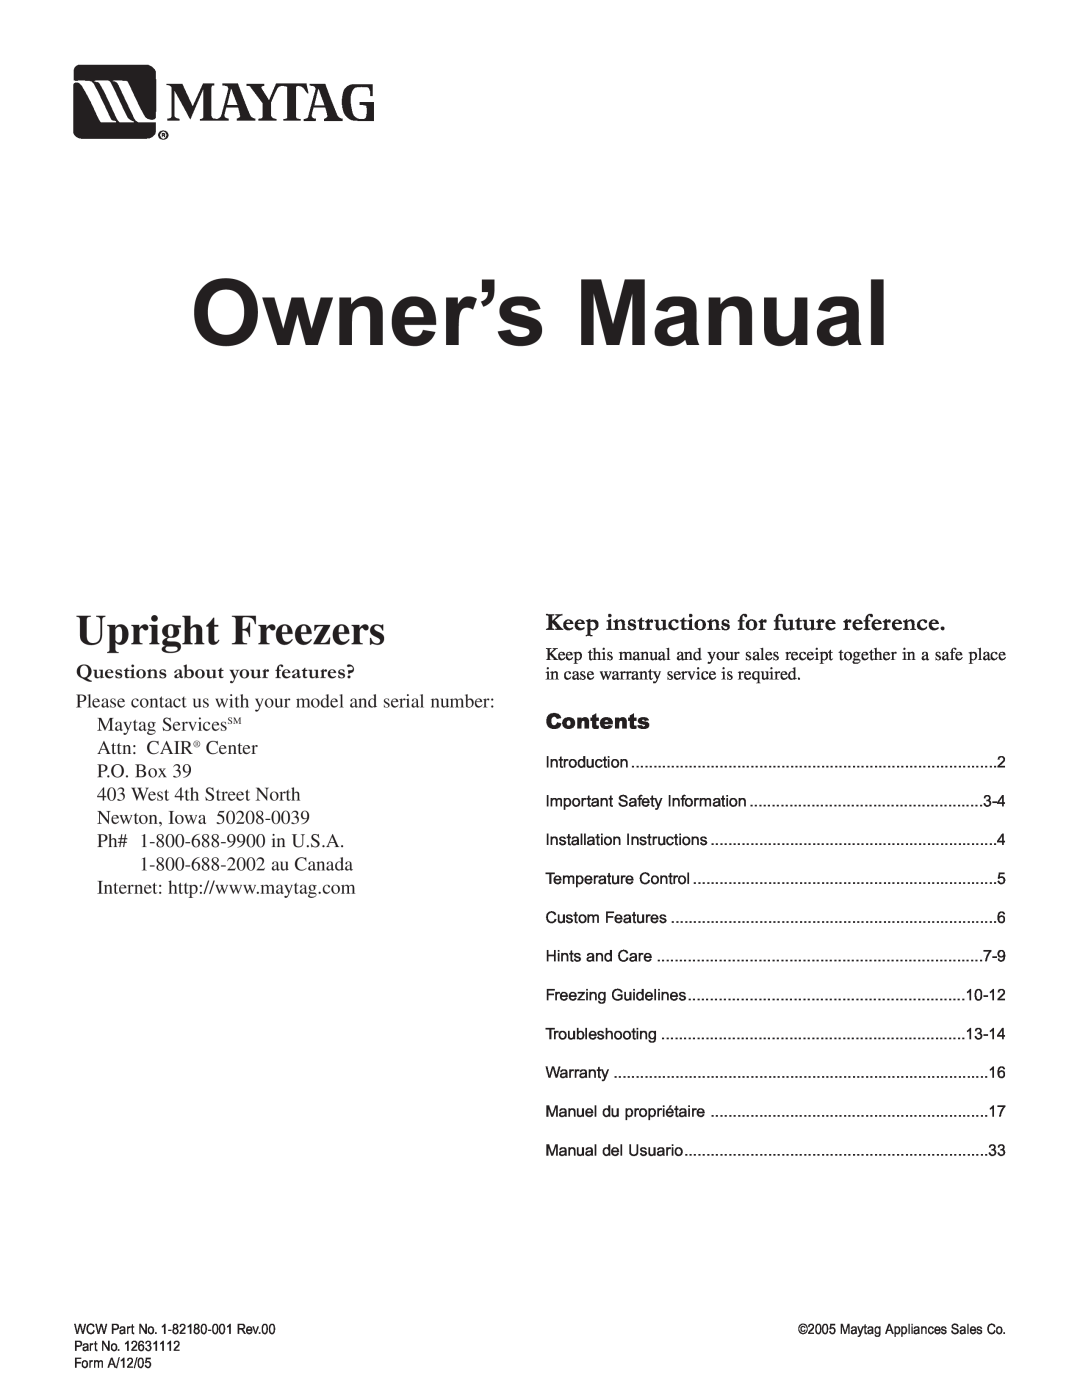 Maytag Upright Freezers owner manual Keep instructions for future reference, Questions about your features?, Contents 